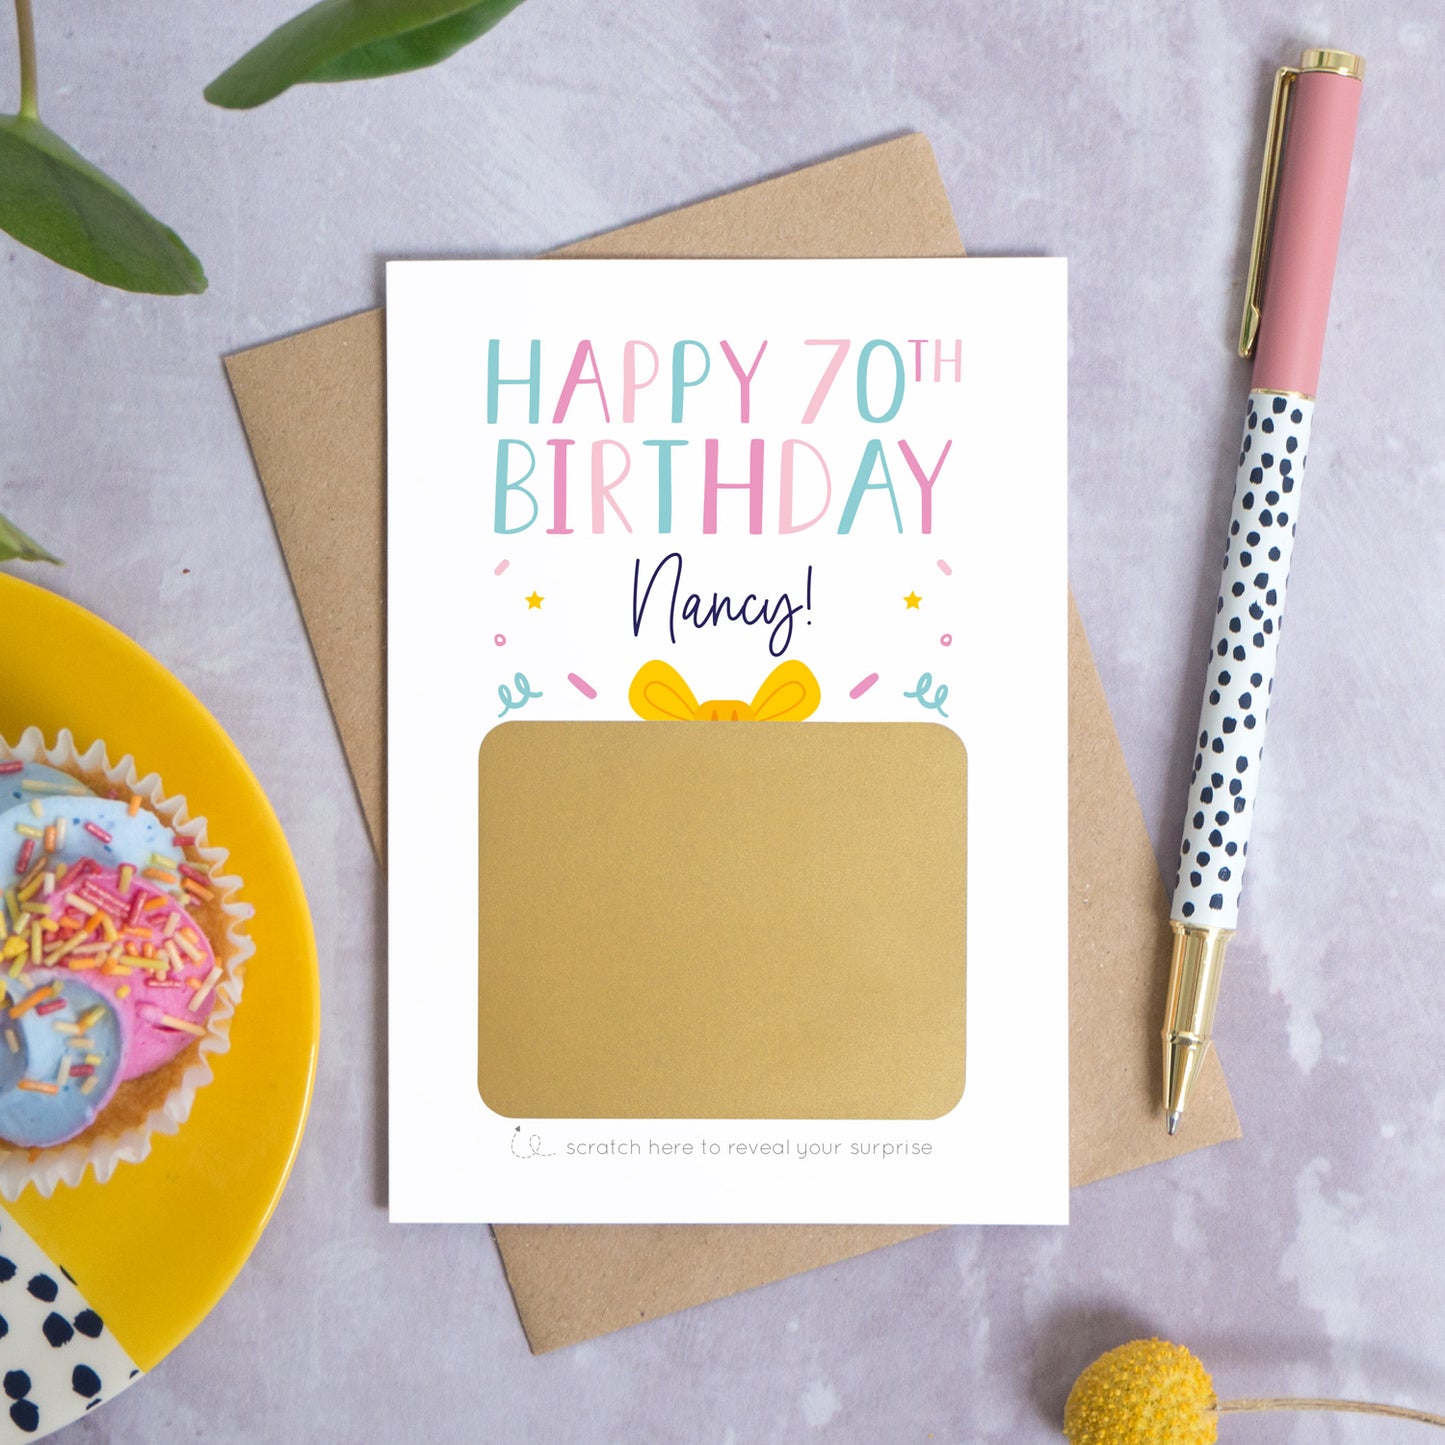 A personalised happy 70th birthday scratch card that has been photographed flat lay style on a grey concrete style background surrounded with foliage, a cupcake and a pen. The card itself shows how it will arrive and looks when it is completely unscratched.